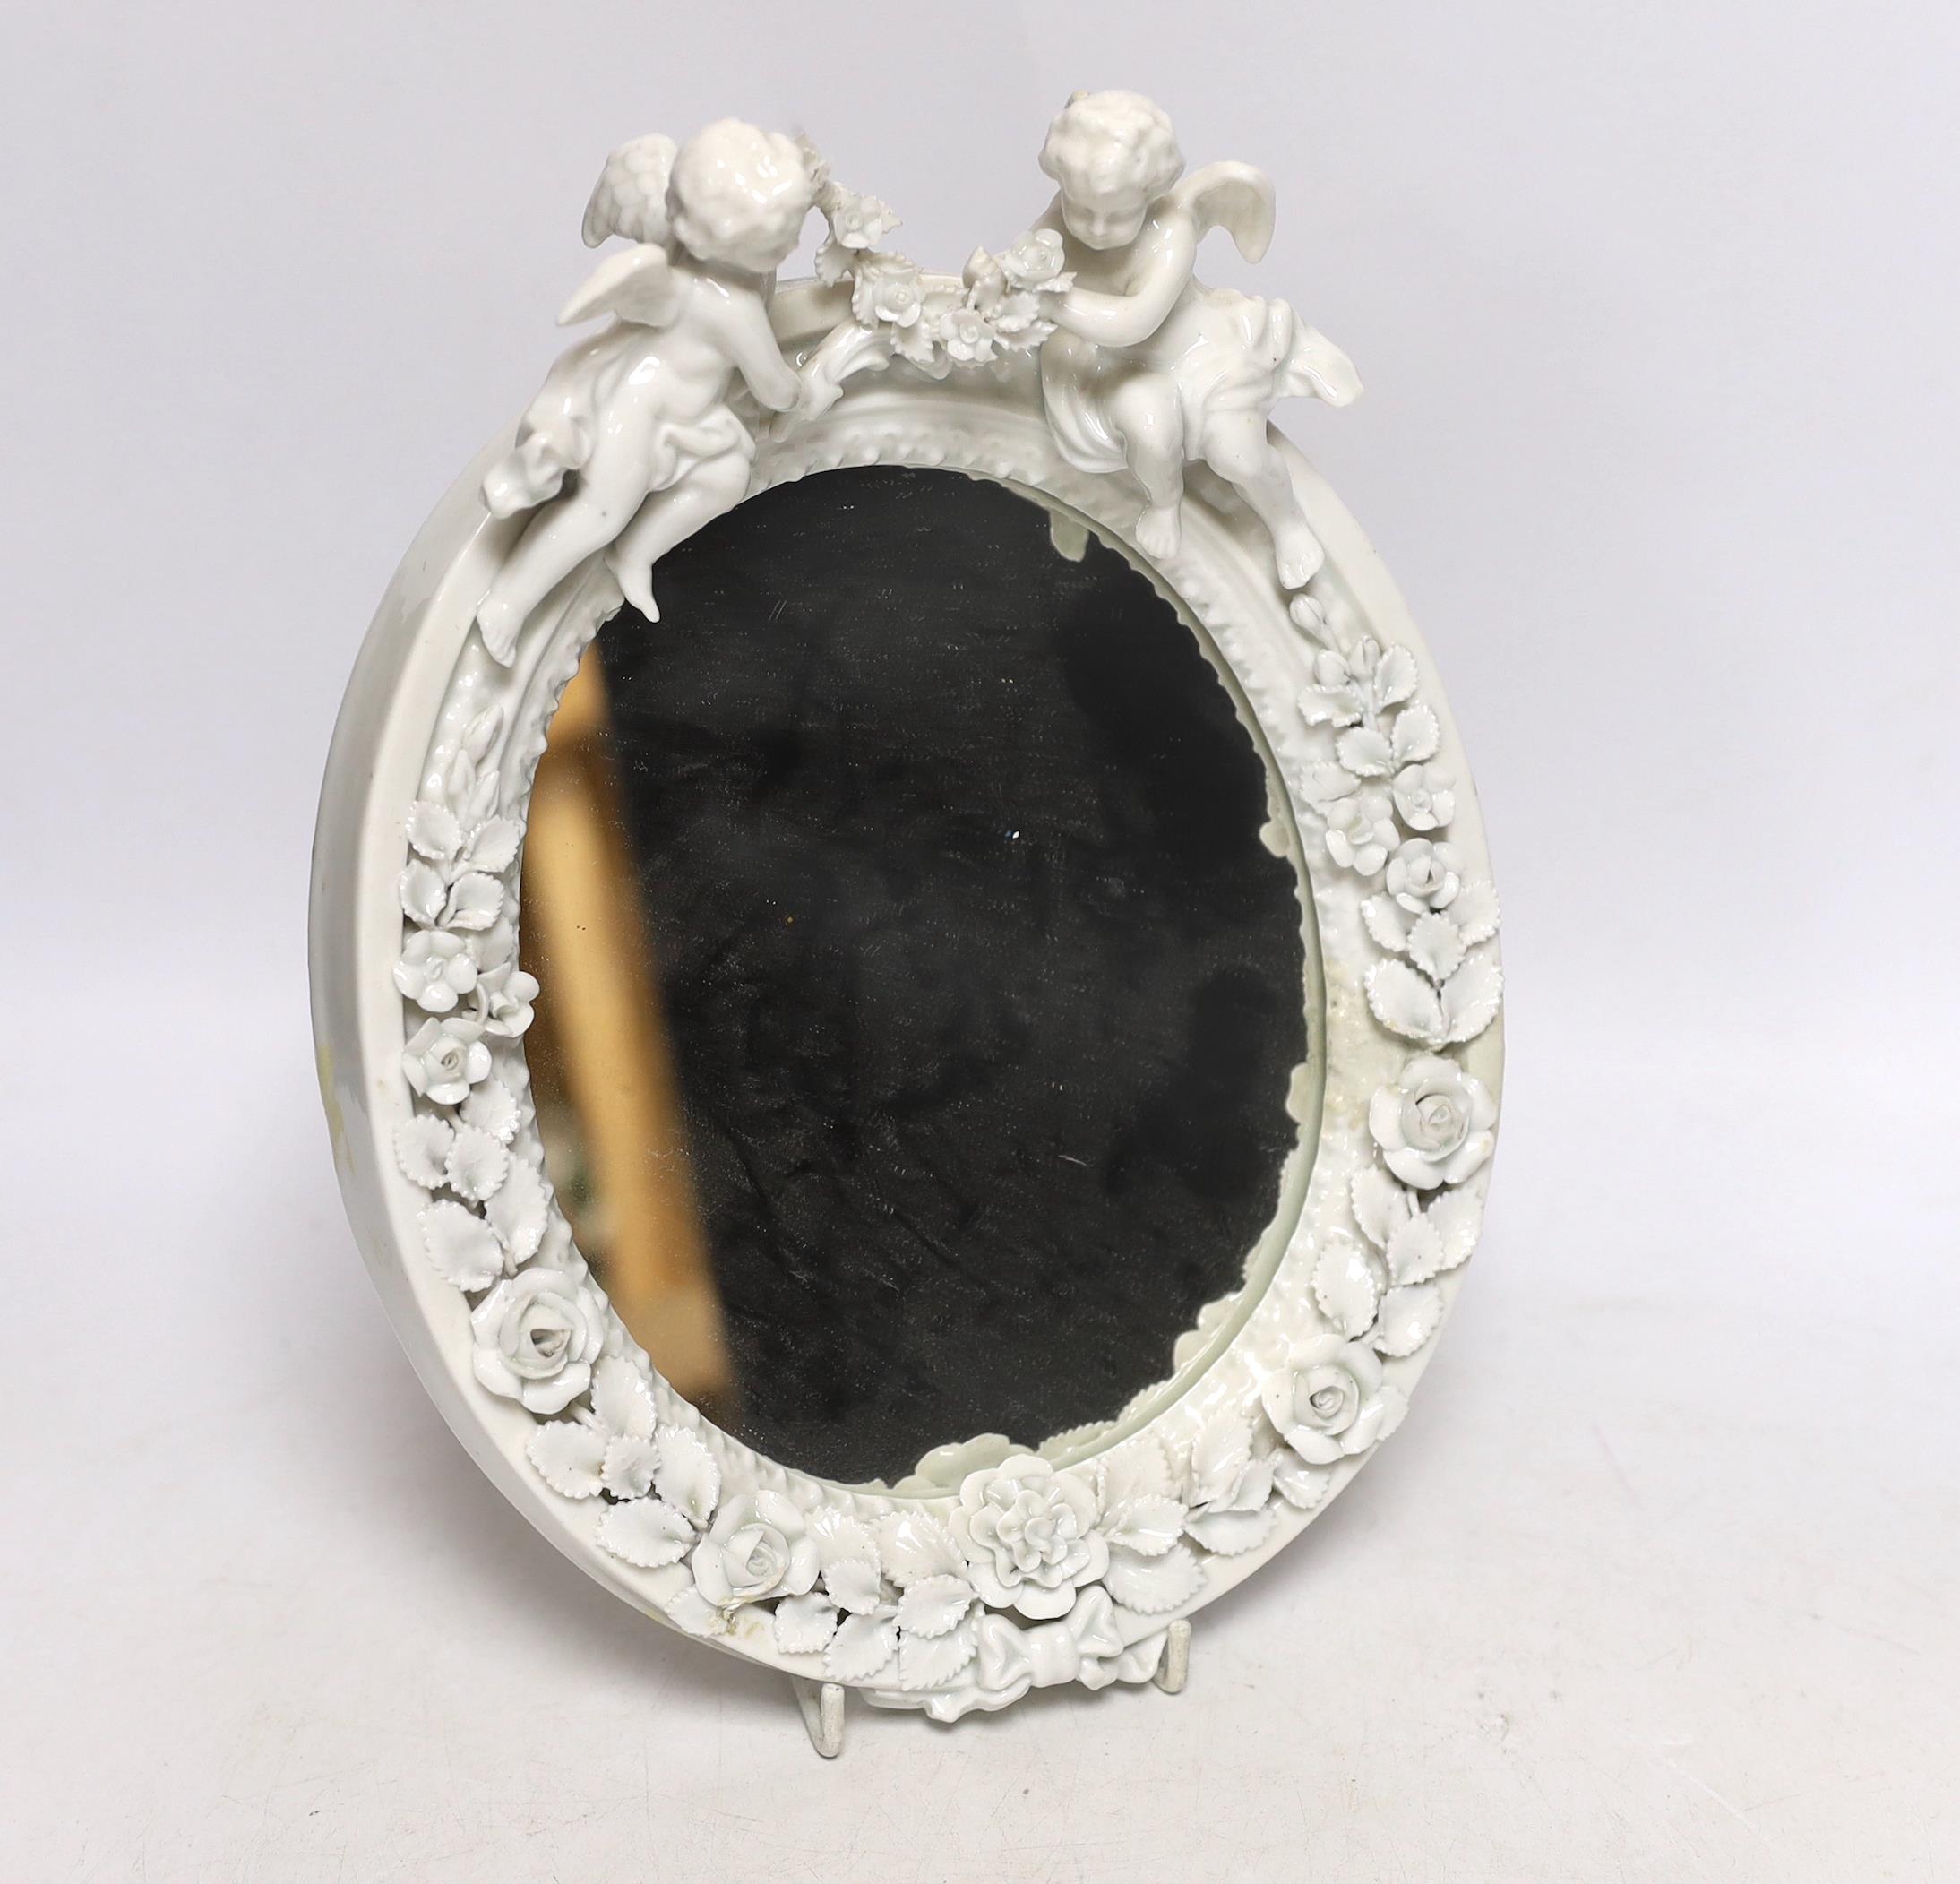 Seven Continental porcelain figures and an oval mirror with floral encrusted decoration, 27cm high - Image 5 of 6